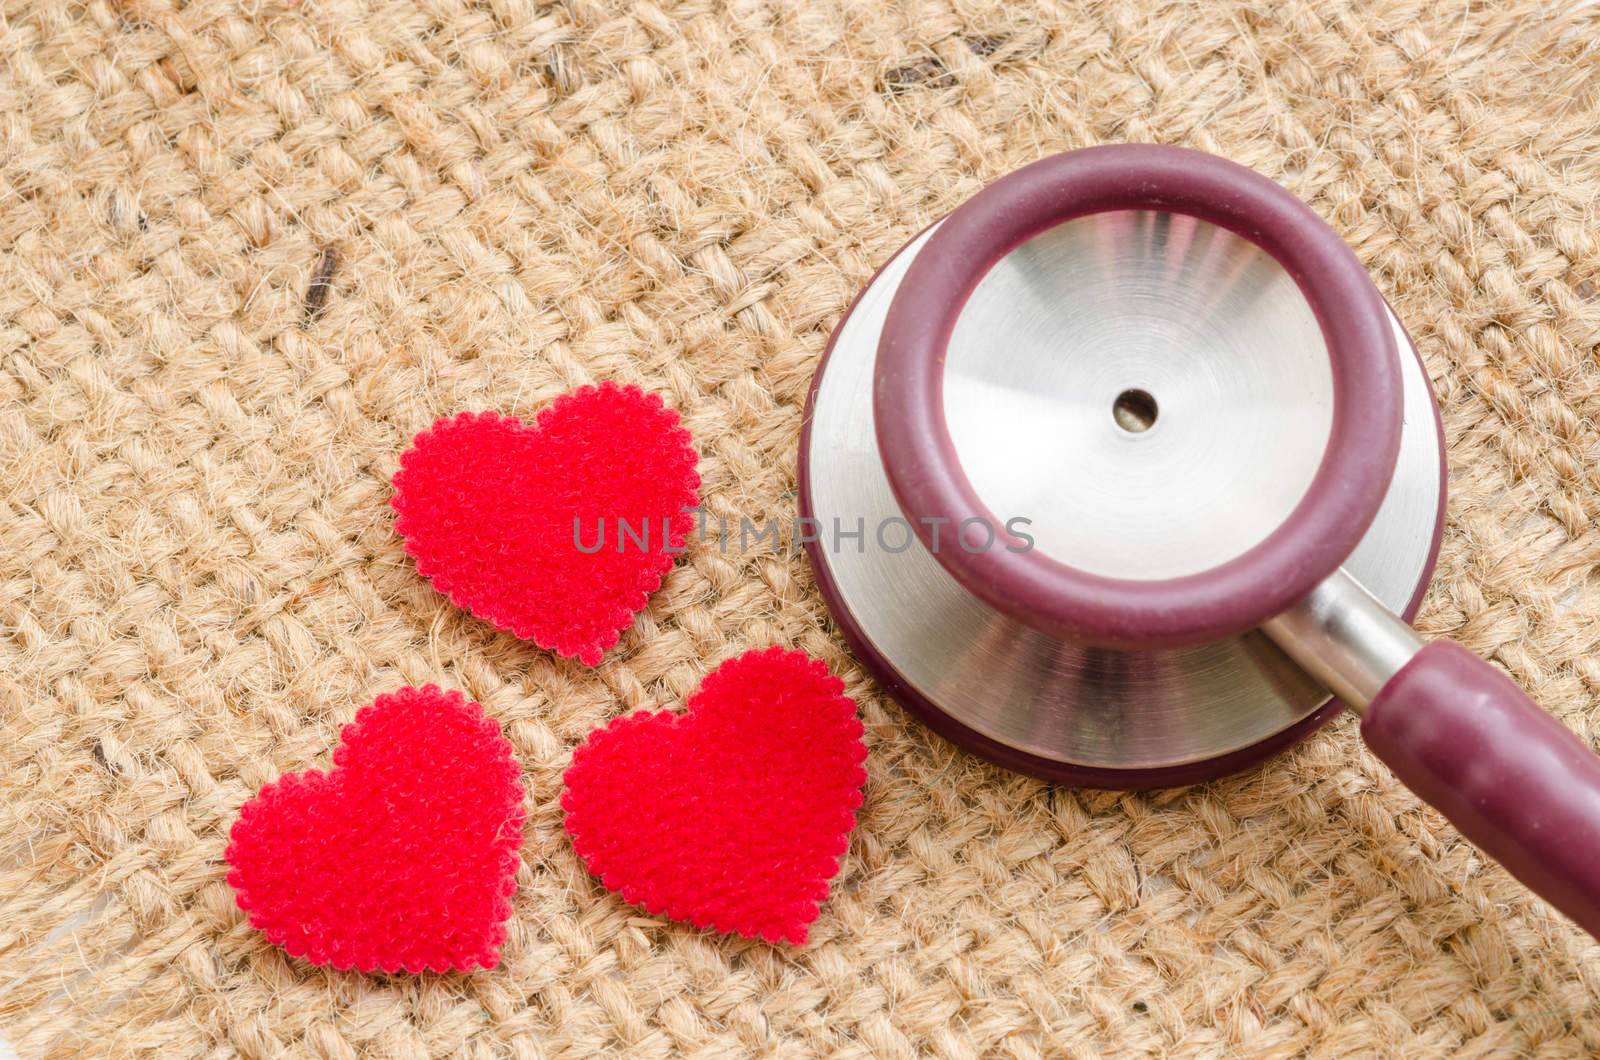 Red heart and a stethoscope on sack background.